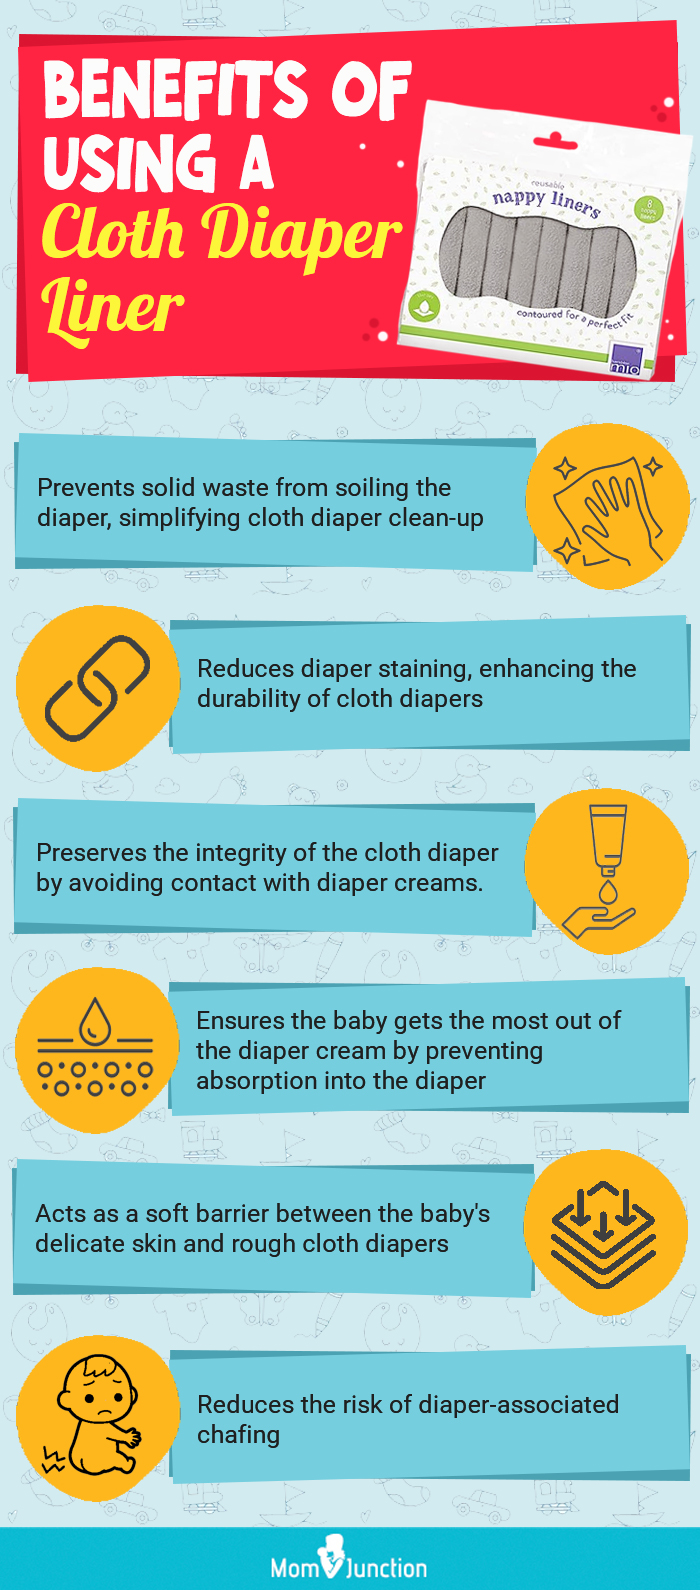 Benefits Of Using A Cloth Diaper Liner (infographic)